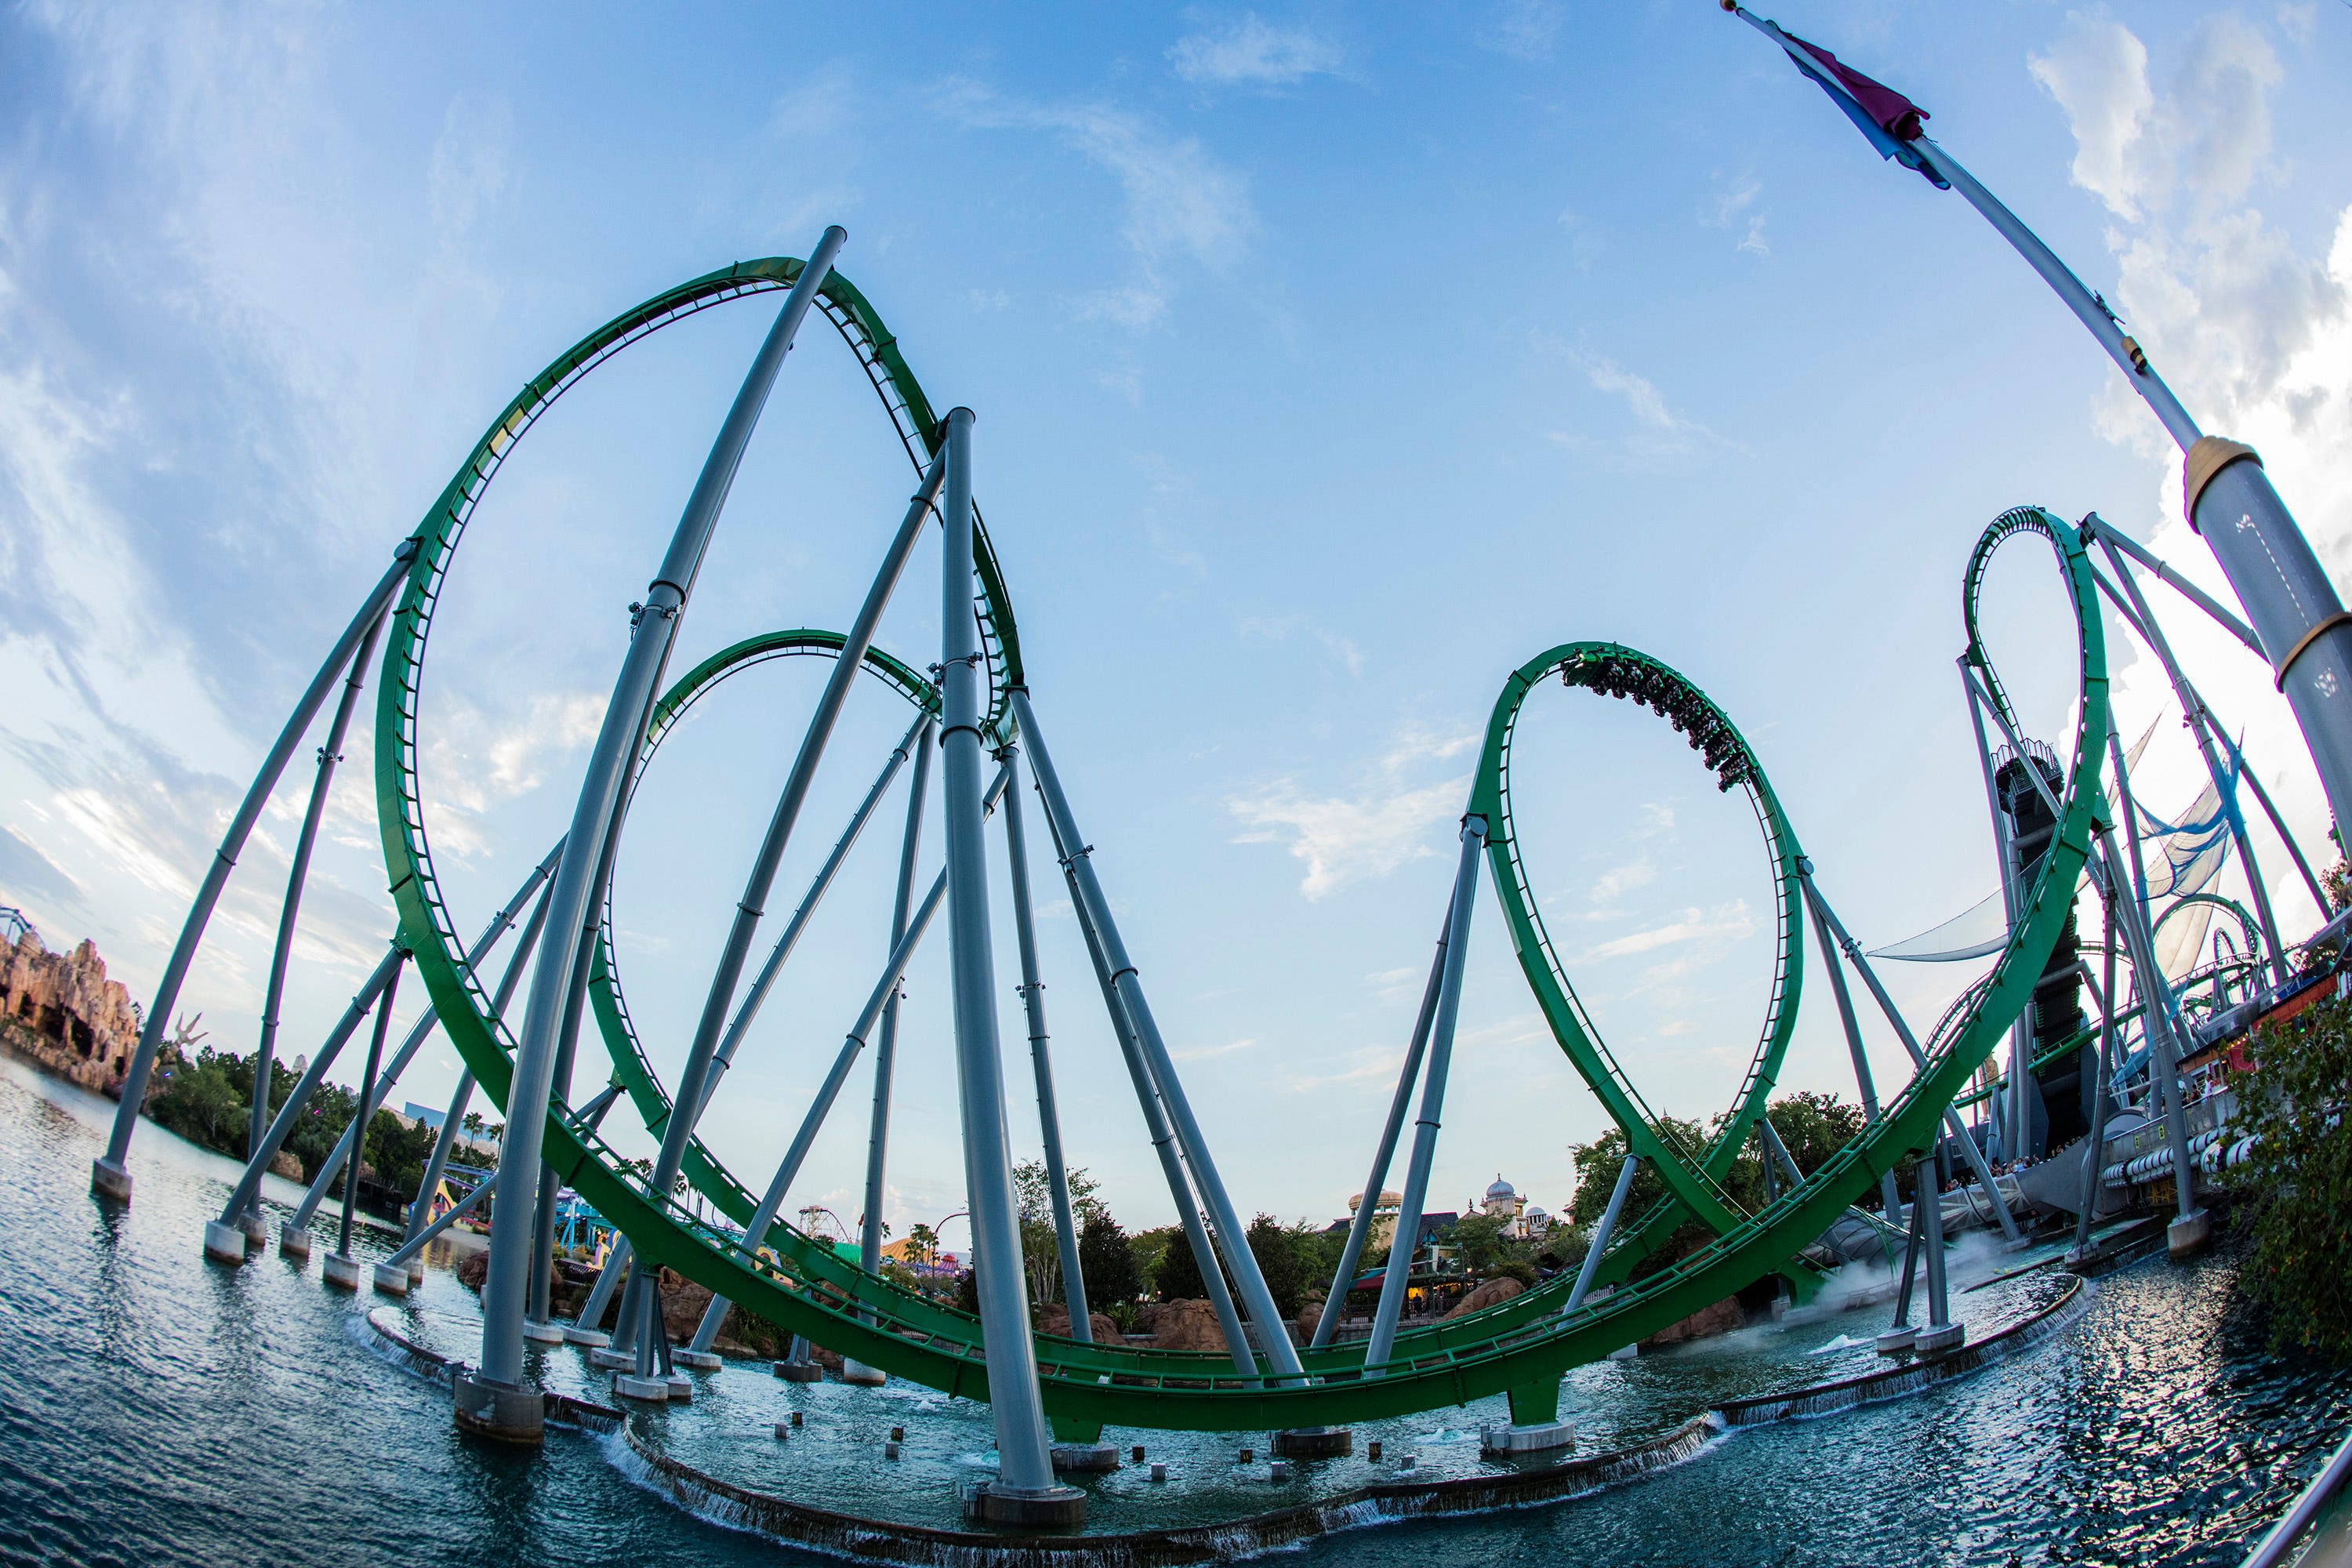 What's the best rollercoaster in Florida? Vote for your favorite among these two Finals!